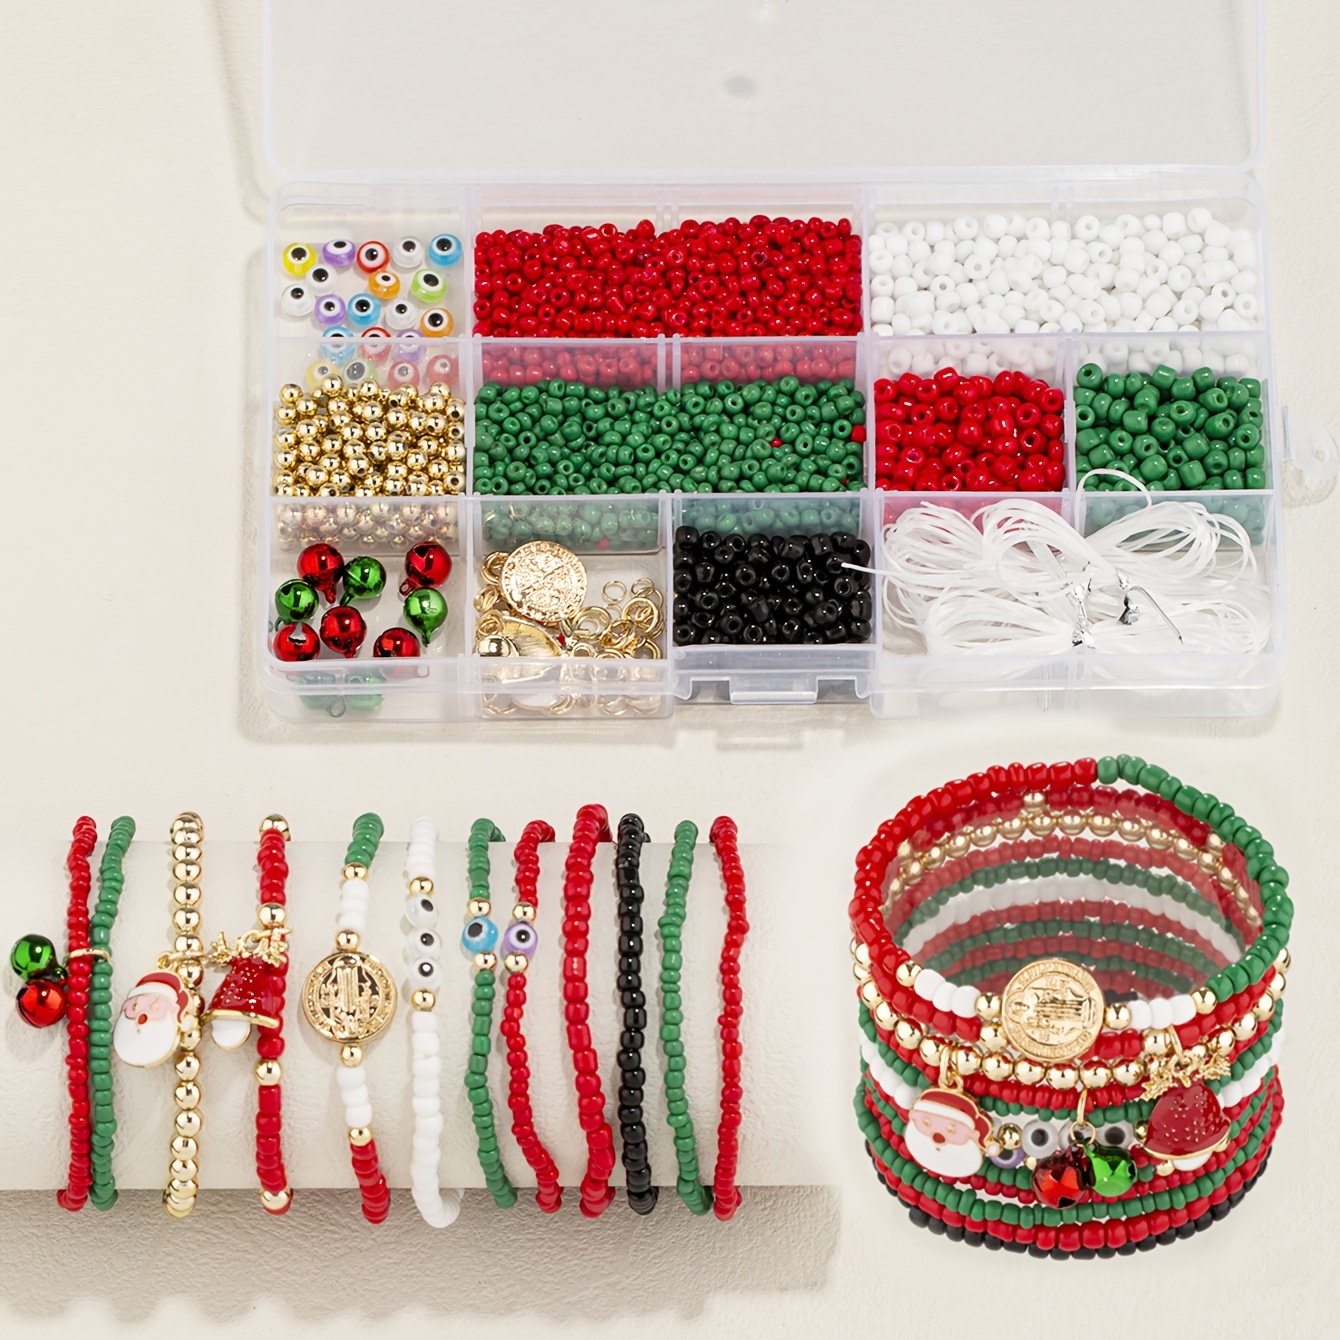 Colorful Beaded Making Sushi Rice DIY Bracelet Making Kit For Girls  Handmade Friendship Braces Perfect Christmas Gift From Meetaccessories,  $15.88